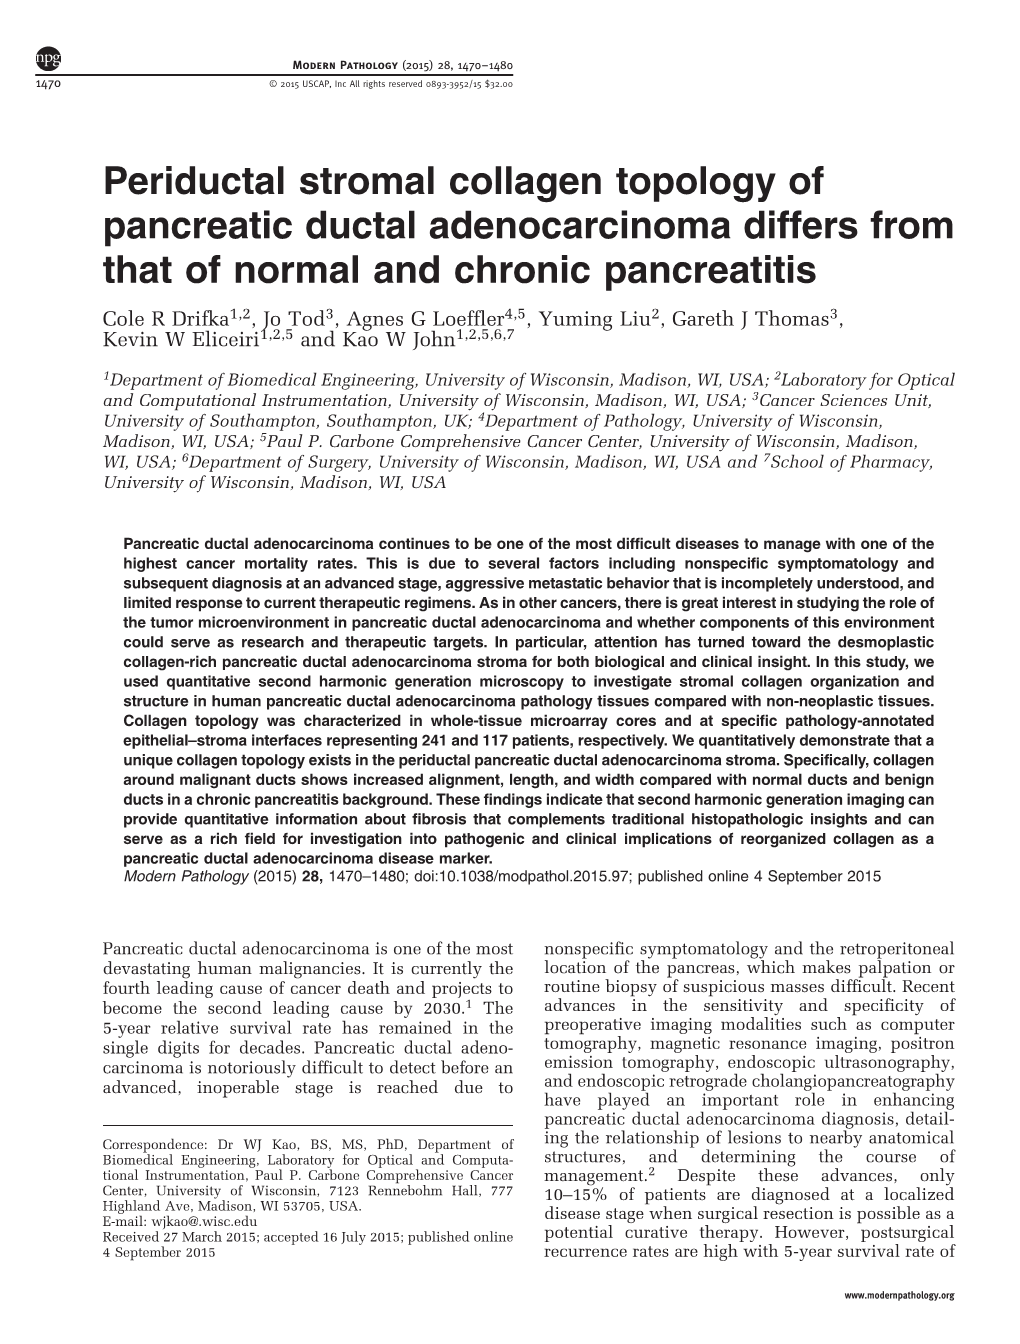 Periductal Stromal Collagen Topology of Pancreatic Ductal